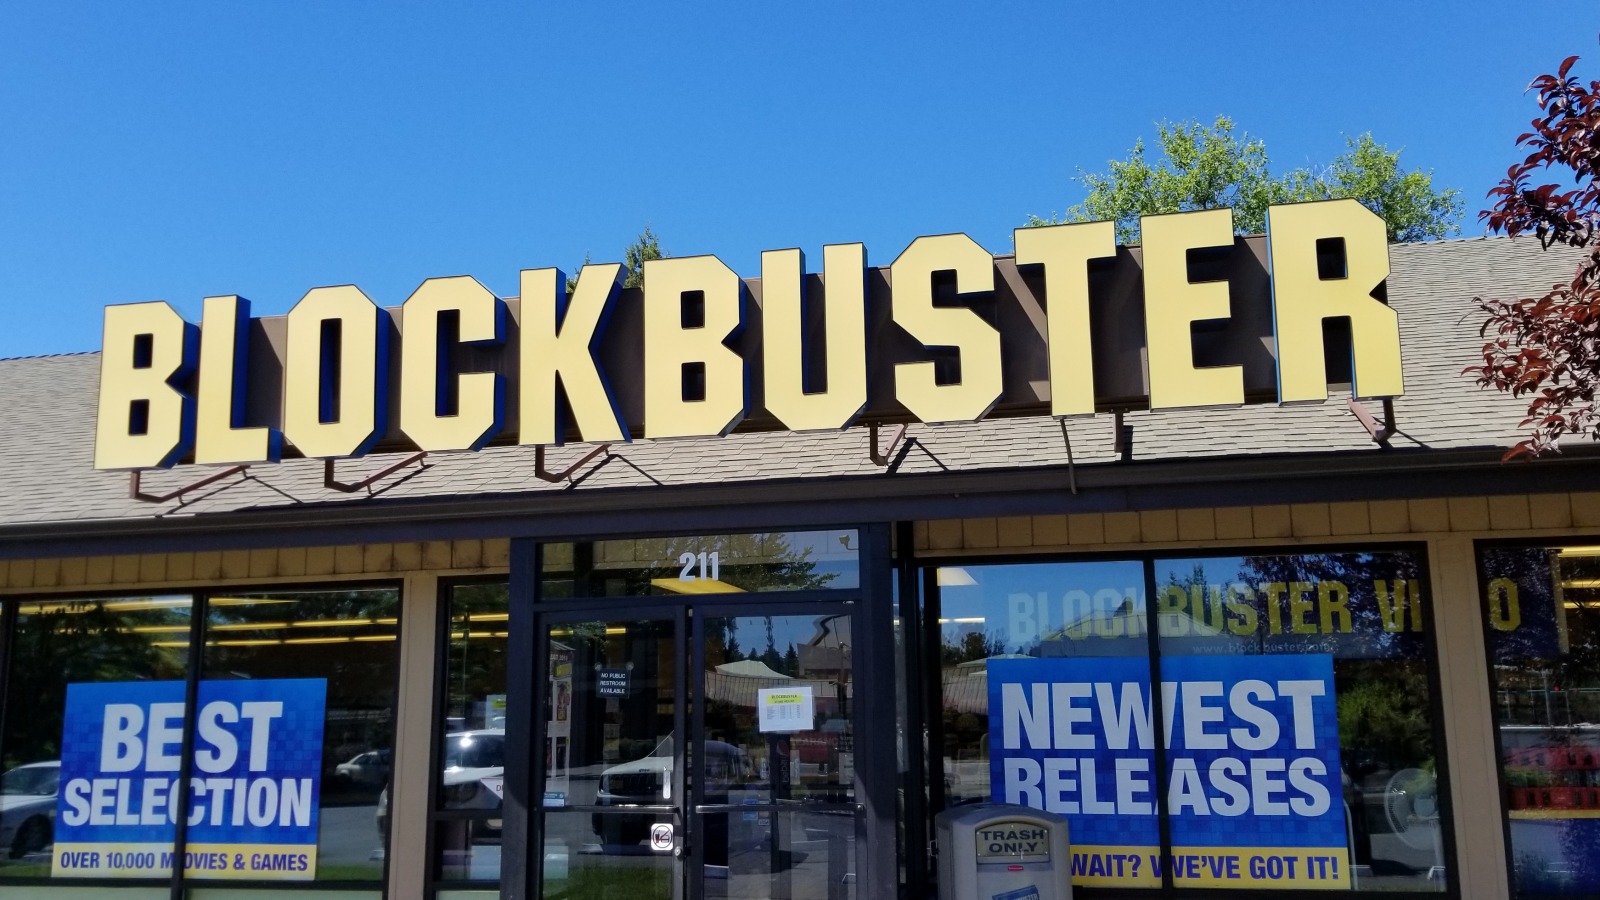 For DVD aficionados in Seattle, the last Blockbuster is the local